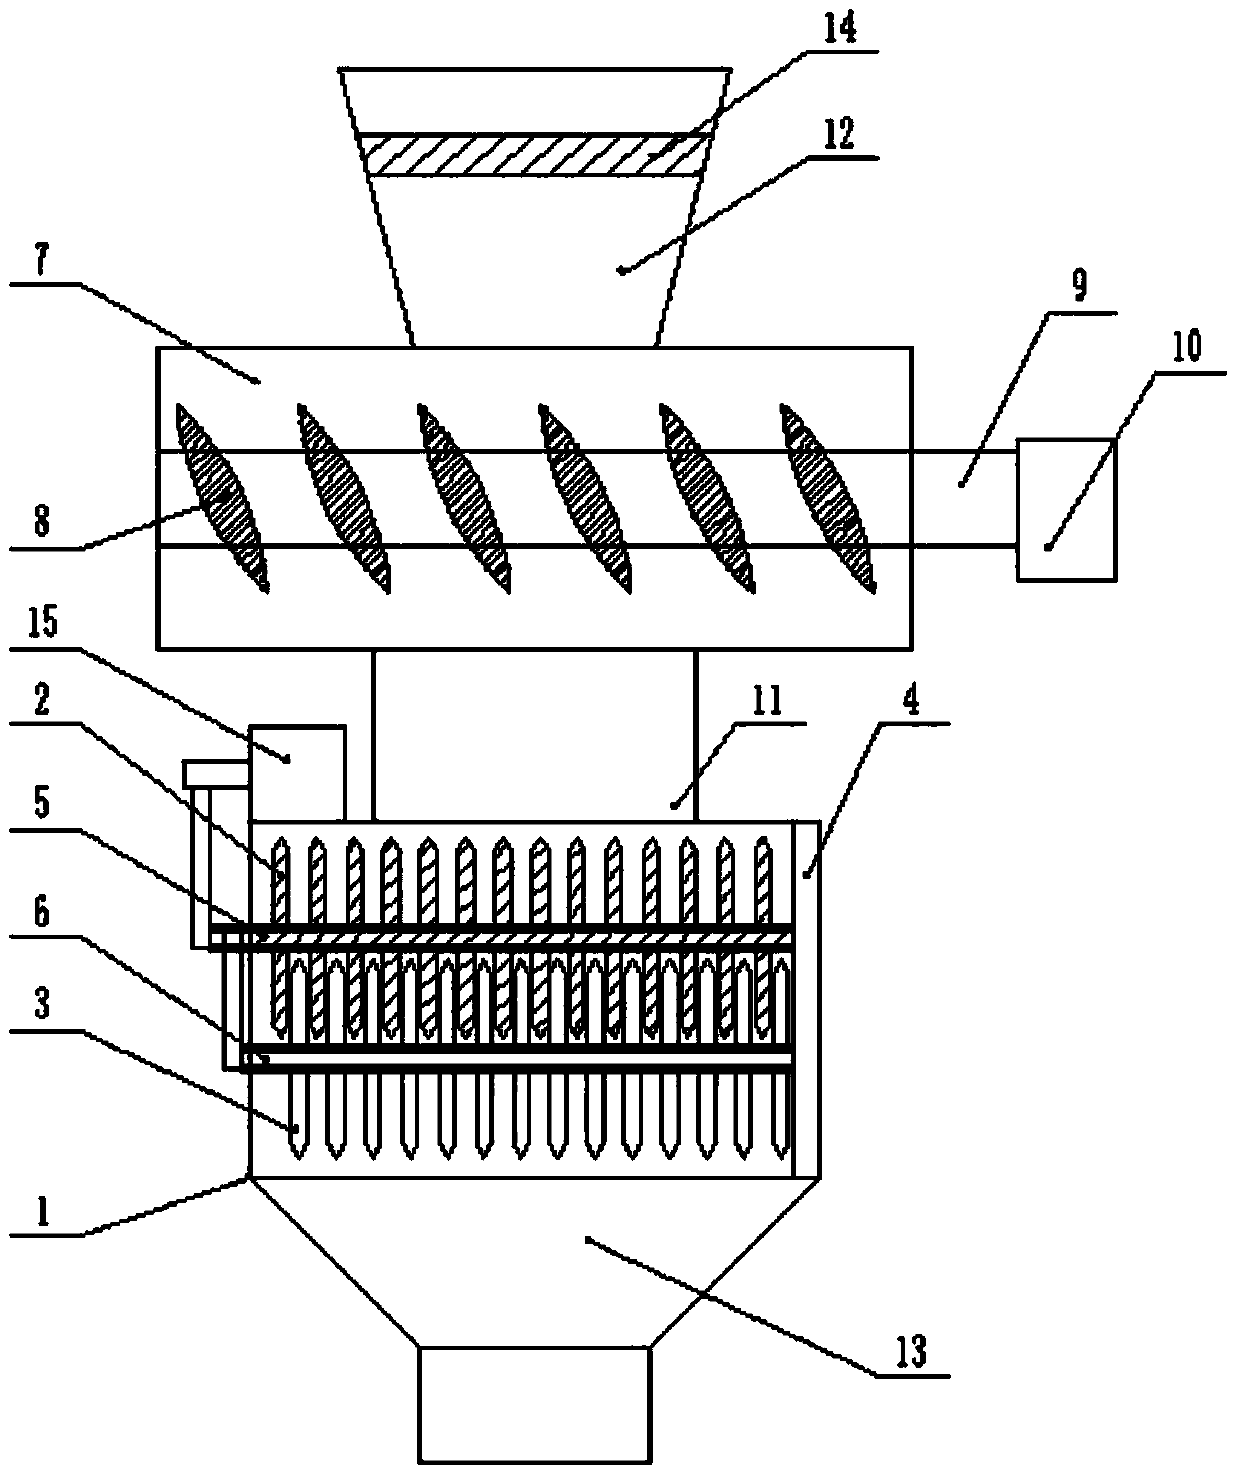 Novel two-stage crusher